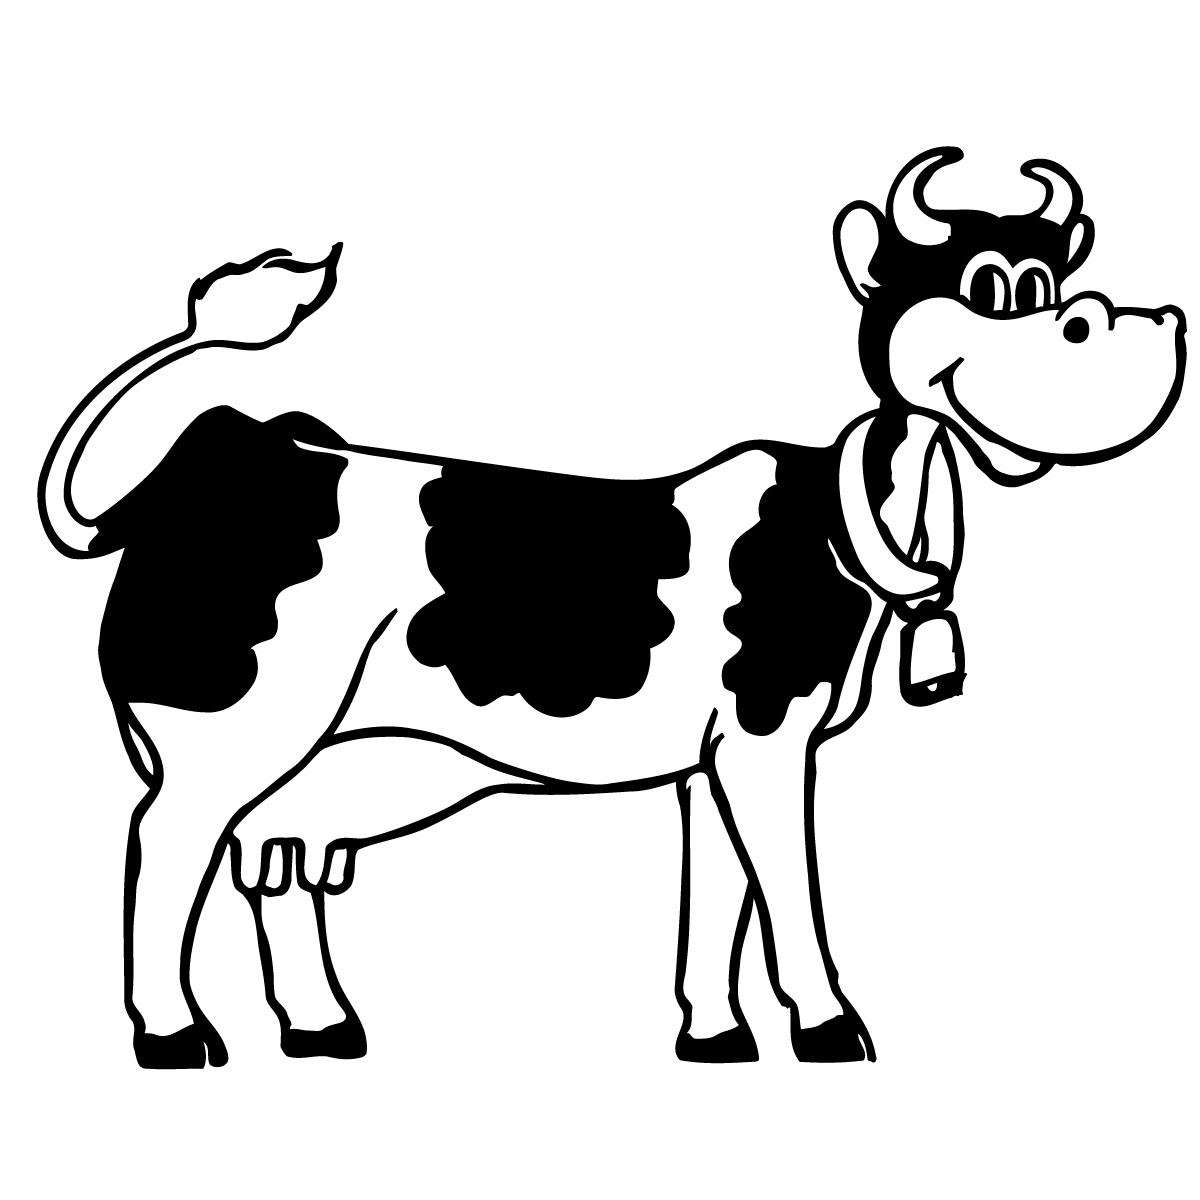 Clip  Funny Pictures  Cartoon Cow Pictures Cartoon Cow Cartoon Cows